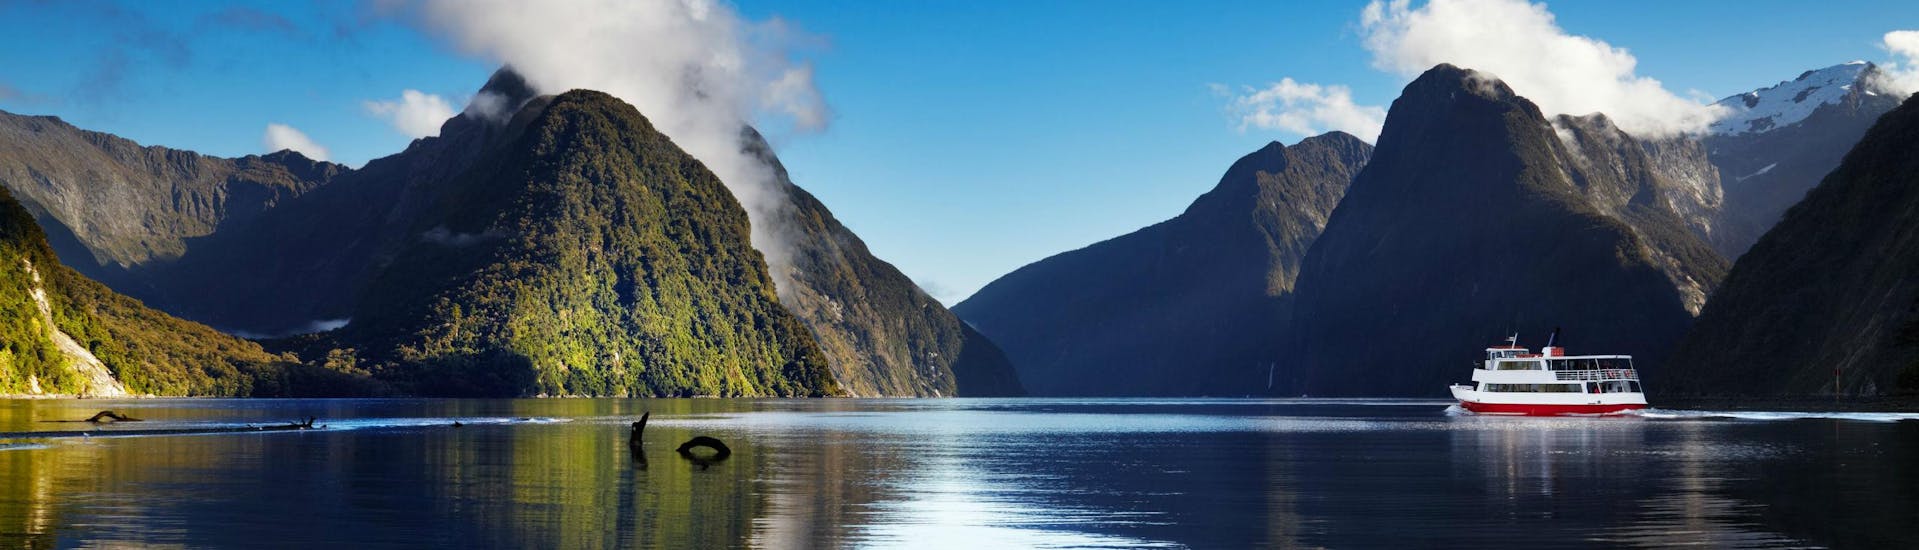 A boat trip in Milford Sound is one of the highlights of many holiday-makers' visit to New Zealand.